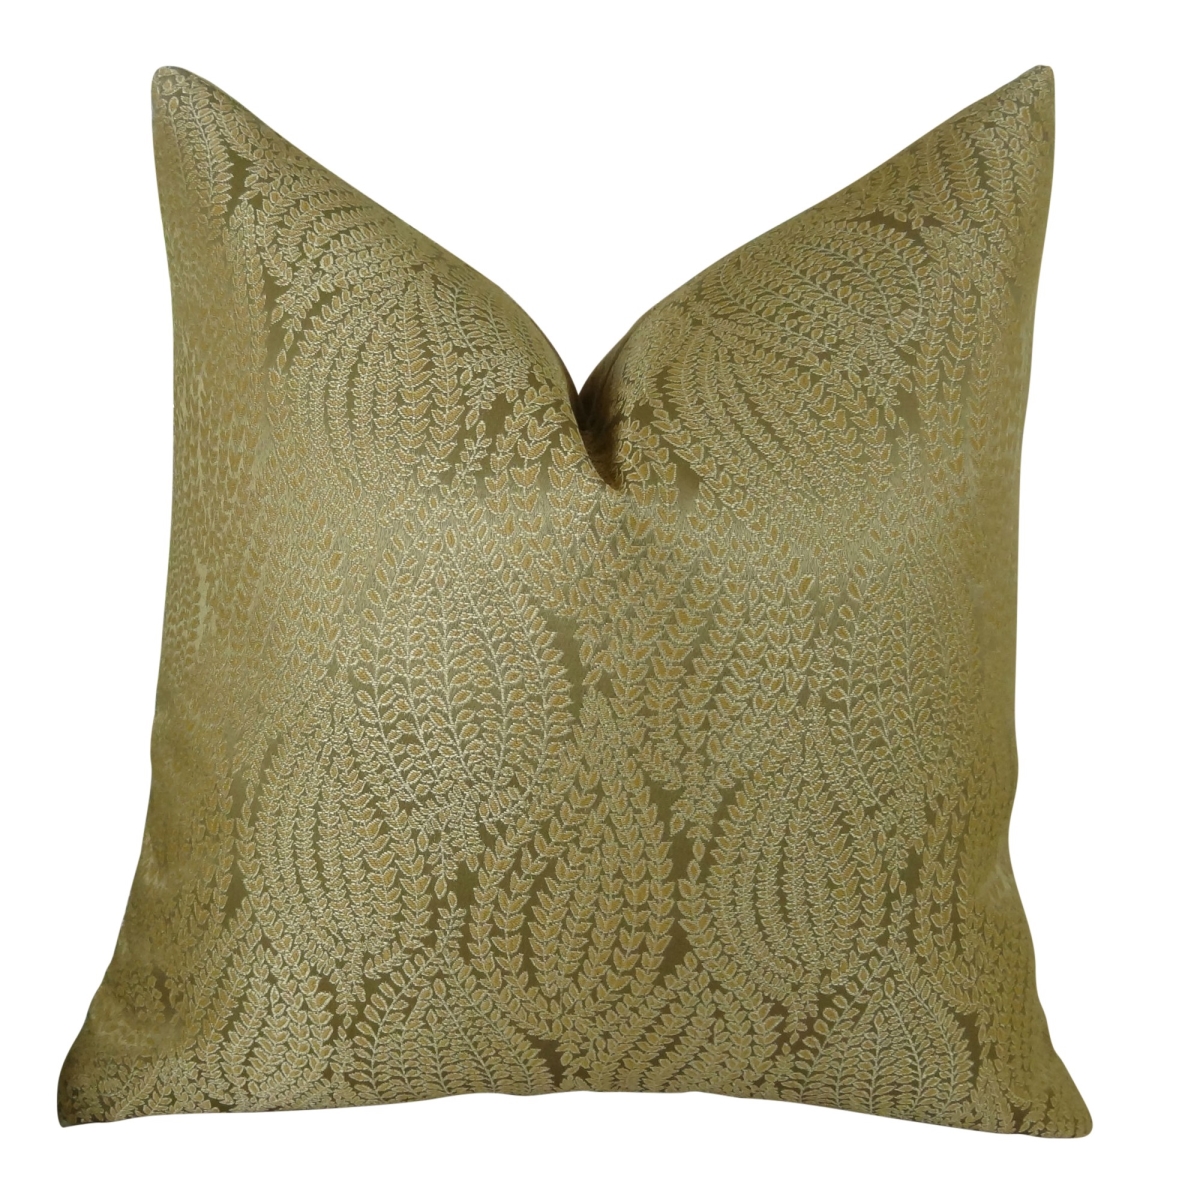 Pb11015-2020-dp Leaf Pod Handmade Double Sided Throw Pillow, Gold - 20 X 20 In.